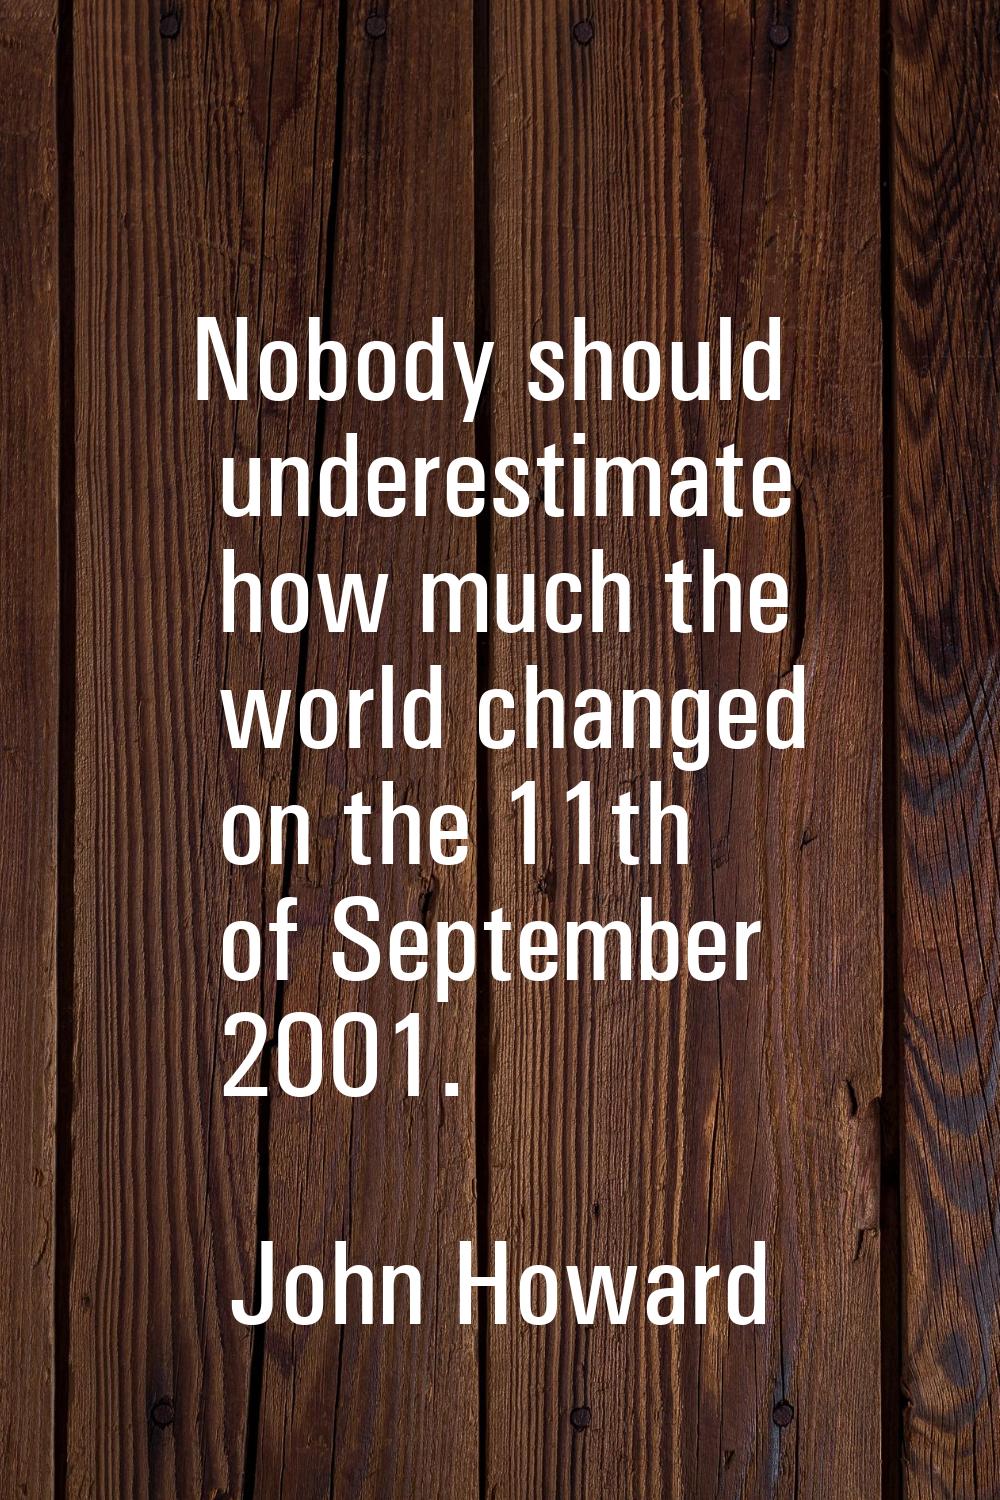 Nobody should underestimate how much the world changed on the 11th of September 2001.